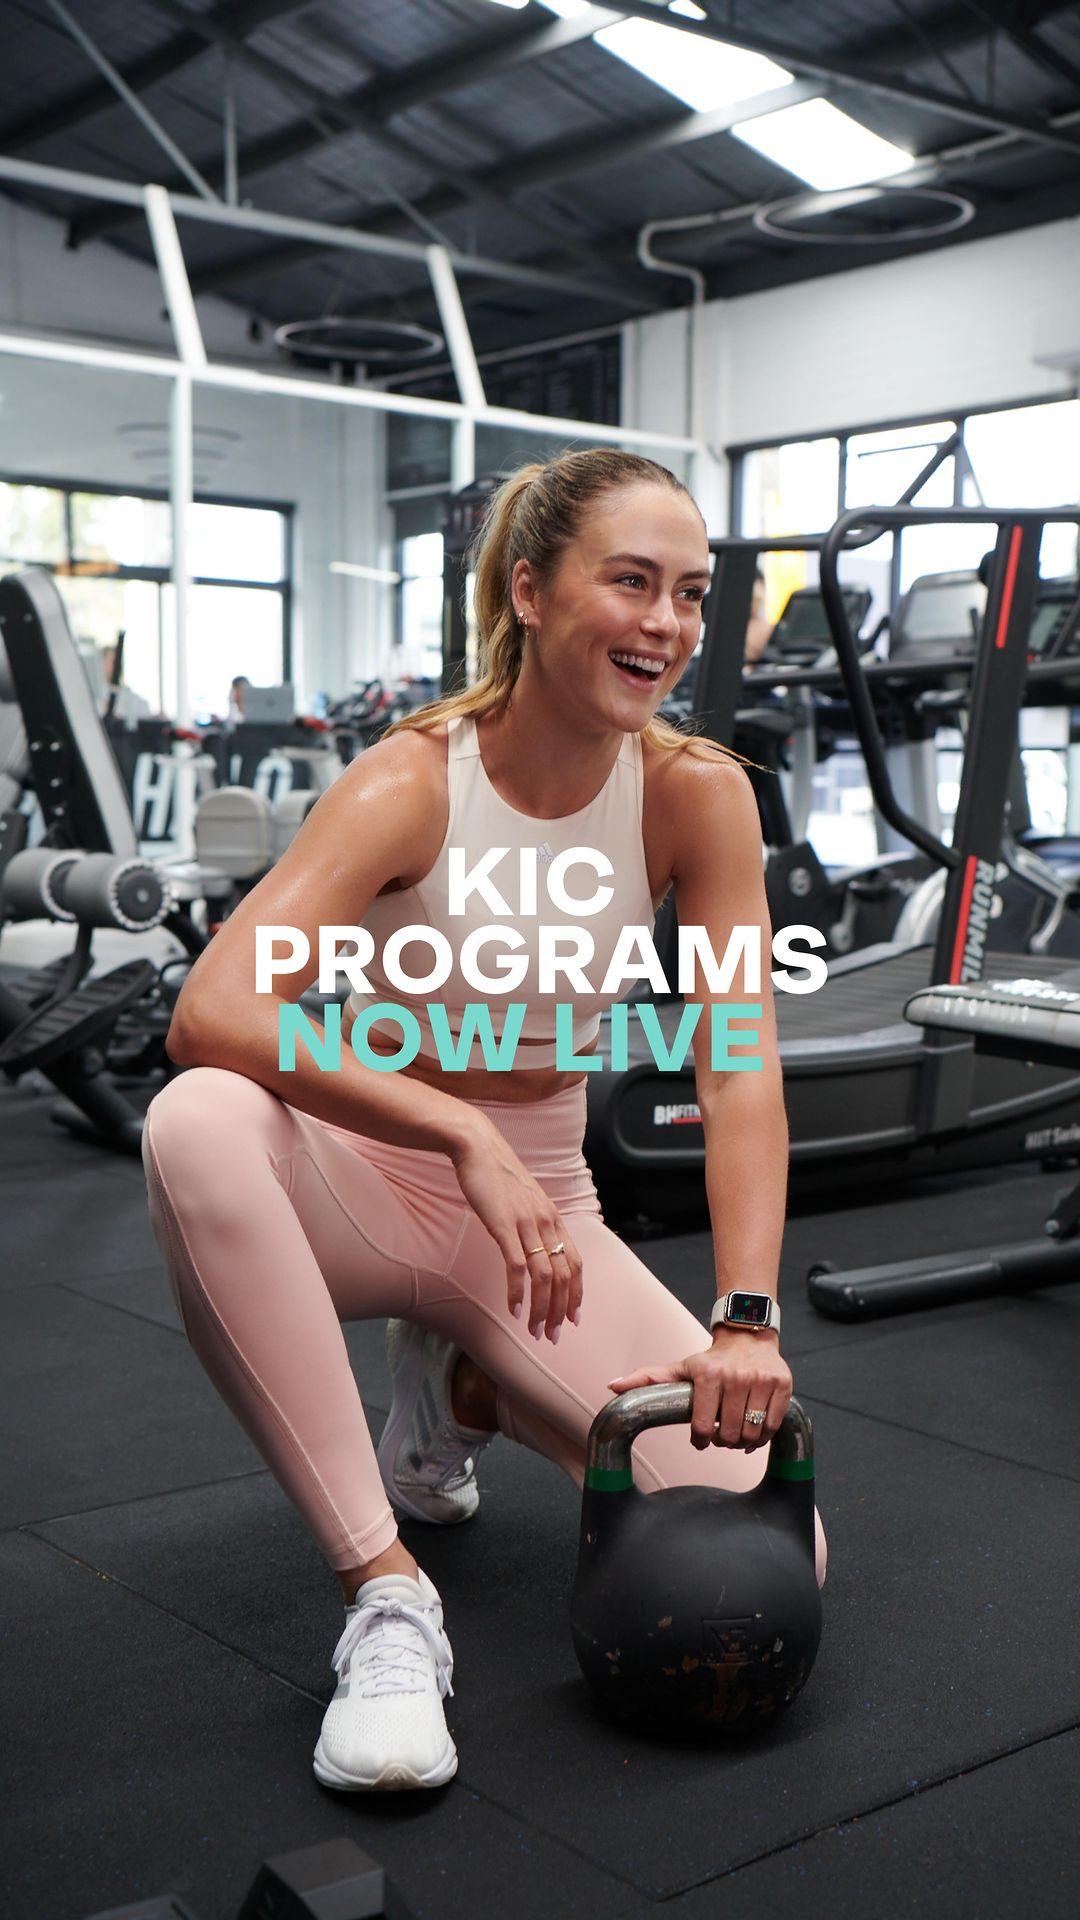 class="content__text"
 Our brand new KIC Programs are now live! 

Are you ready to level up your fitness and achieve your goals in 2023? Steph will show you how! 

Our progressive KIC Programs are tailored to all fitness levels and are sure to fire up your workout routine, so you can workout at home or at the gym with confidence. 

These Programs include 3, 4 and 5 day training options per week, they will take your fitness to the next level and improve your strength and endurance, with Steph by your side every step of the way.

Choose your level:

👉KICSTART: 4 Week Program
Beginner level
👉KICFIT: 8 Week Program
Intermediate level 
👉KICPRO: 12 Week Program
Advanced level
👉Equipment Free: 4 Week Program
Beginner level

Plus, KICBUMP Prenatal program for expecting mums. 

What will you achieve?
-Improved strength &amp; endurance
- Positive habits to keep you motivated, accountable and focused on your goals
- Confidence to workout at the gym
- Improved form through educational content
- A sense of accomplishment by challenging yourself

Head to the link in our bio to get started with a KIC program today! Not a subscriber, join today and start your 7 day free trial. #KIC #KICprograms #fitness #workout 
 